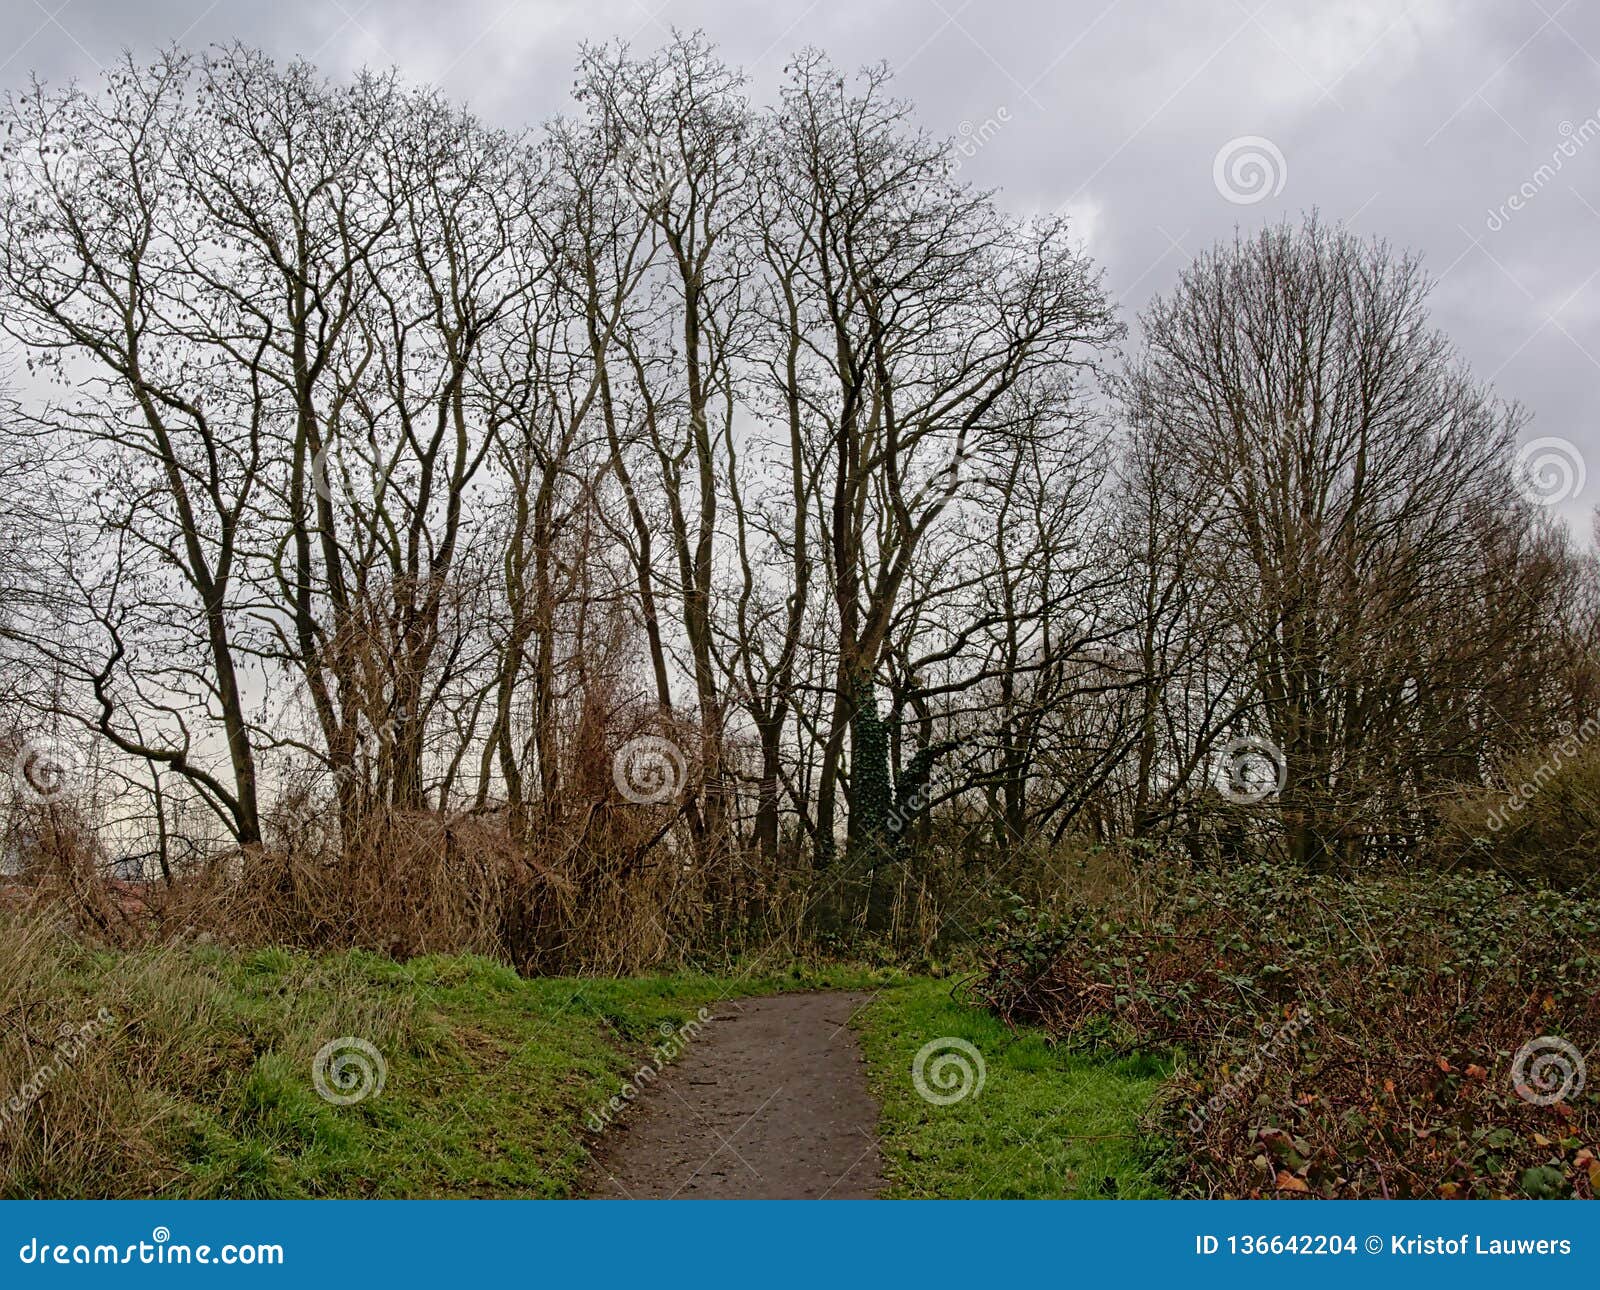 plus Gavmild maling Path in between Shrubs Leading To Bare Ash Trees on a Cloudy Winter Day  Stock Photo - Image of rubus, adventure: 136642204